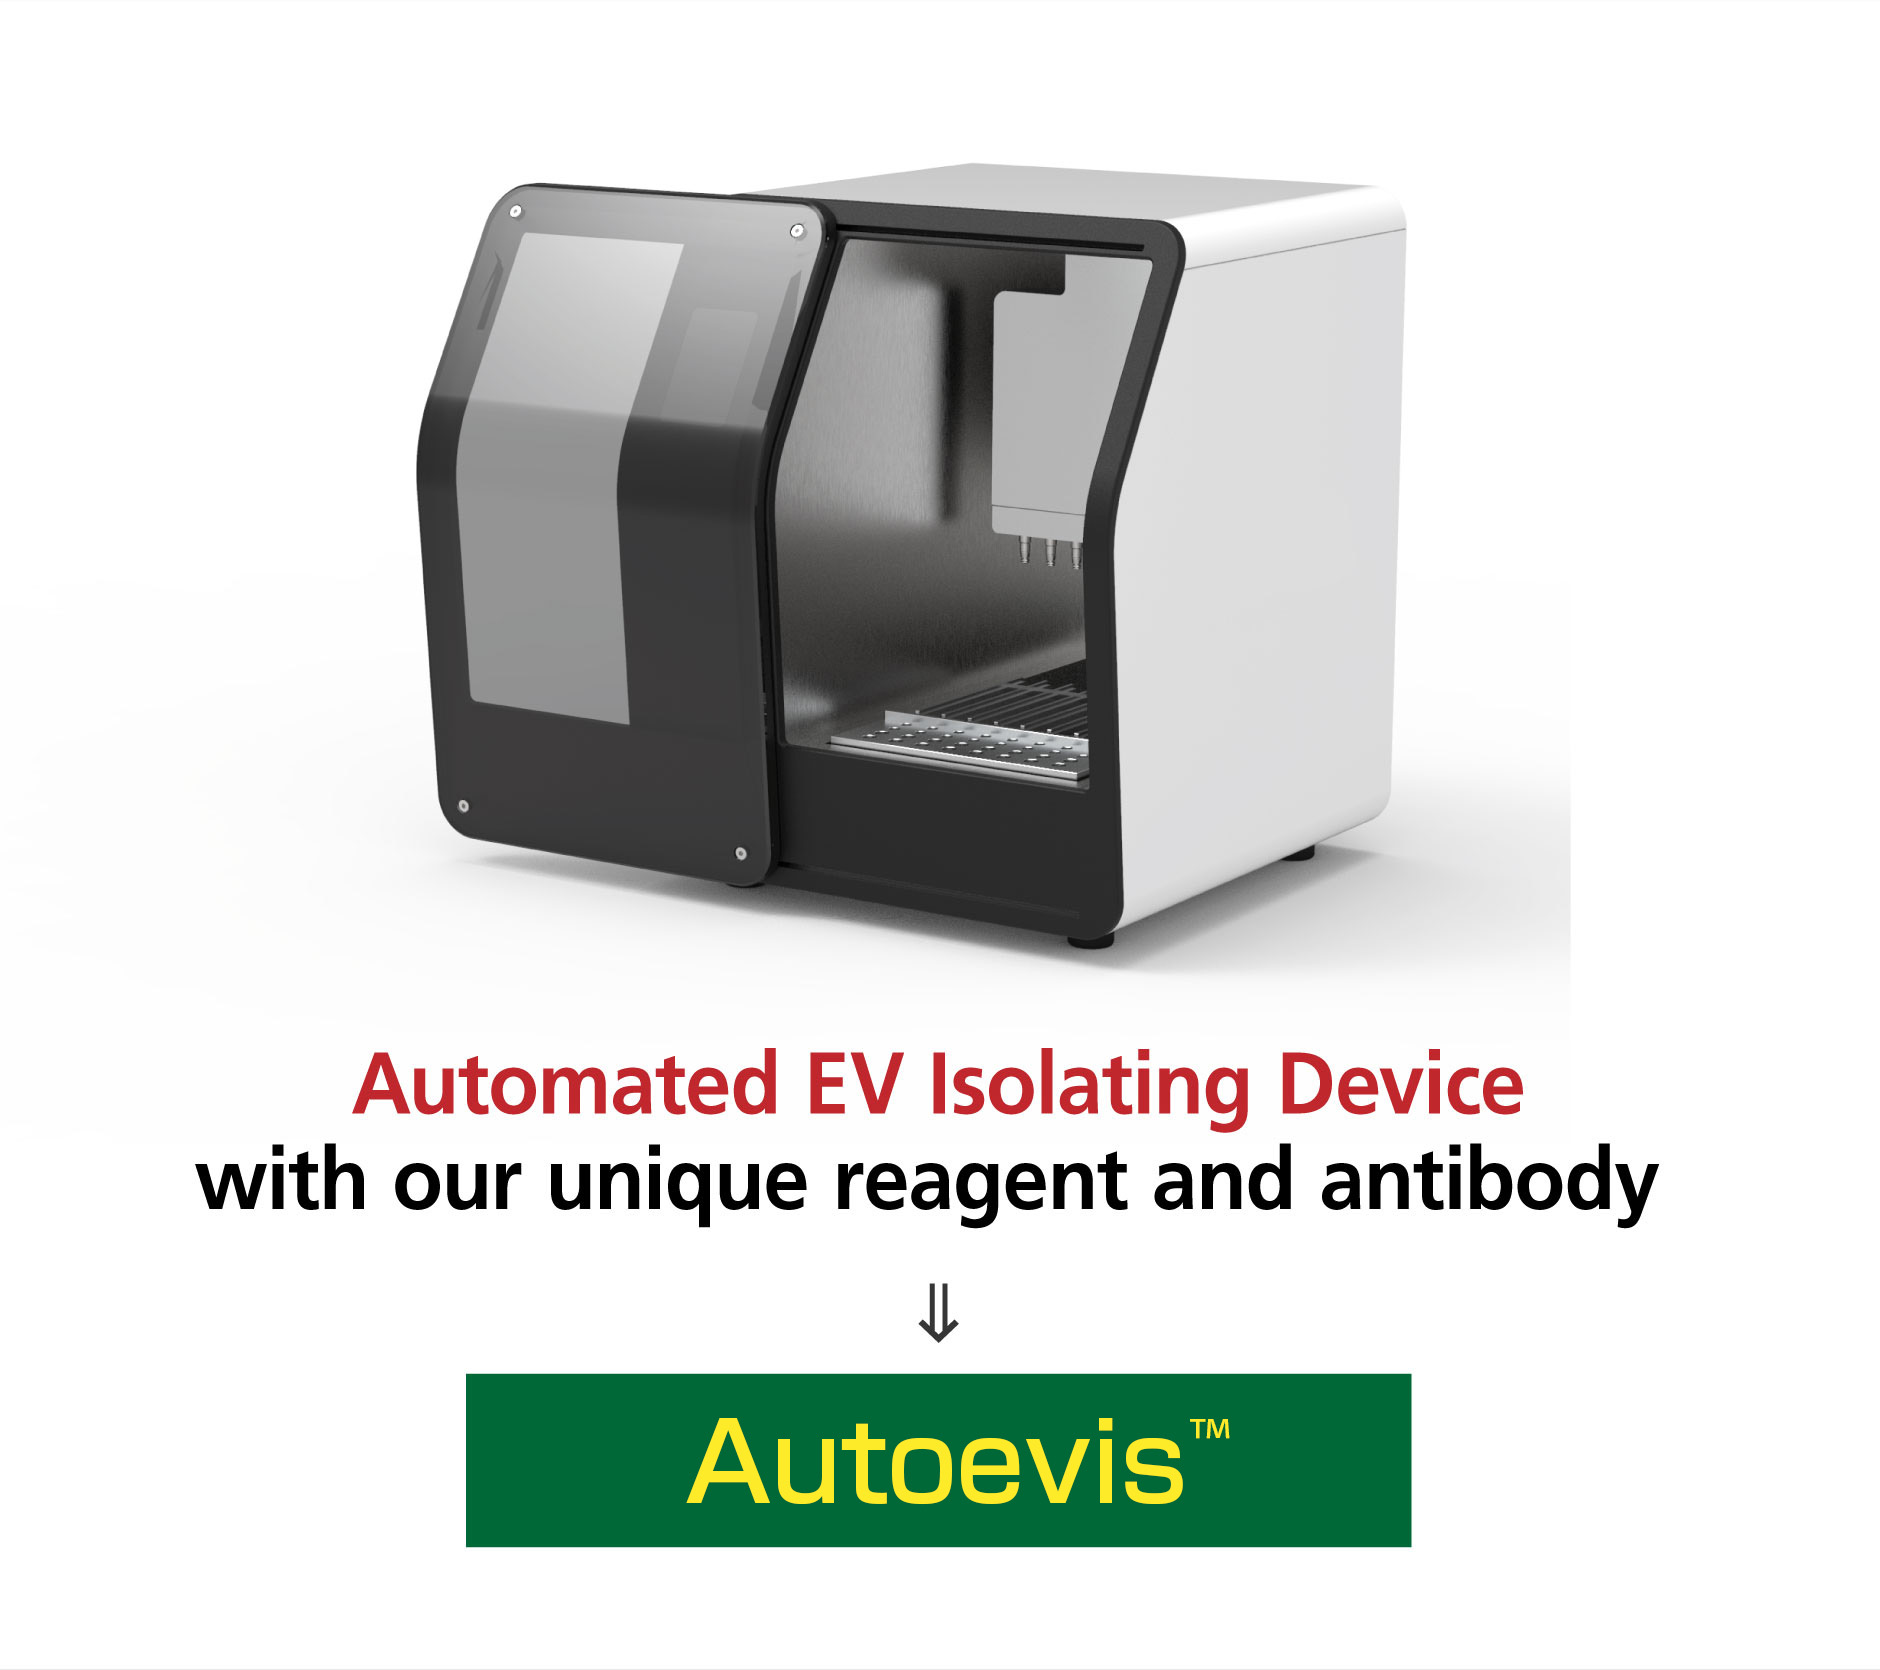 Automated EV Isolating Device with our unique reagent and antibody Autoevis™